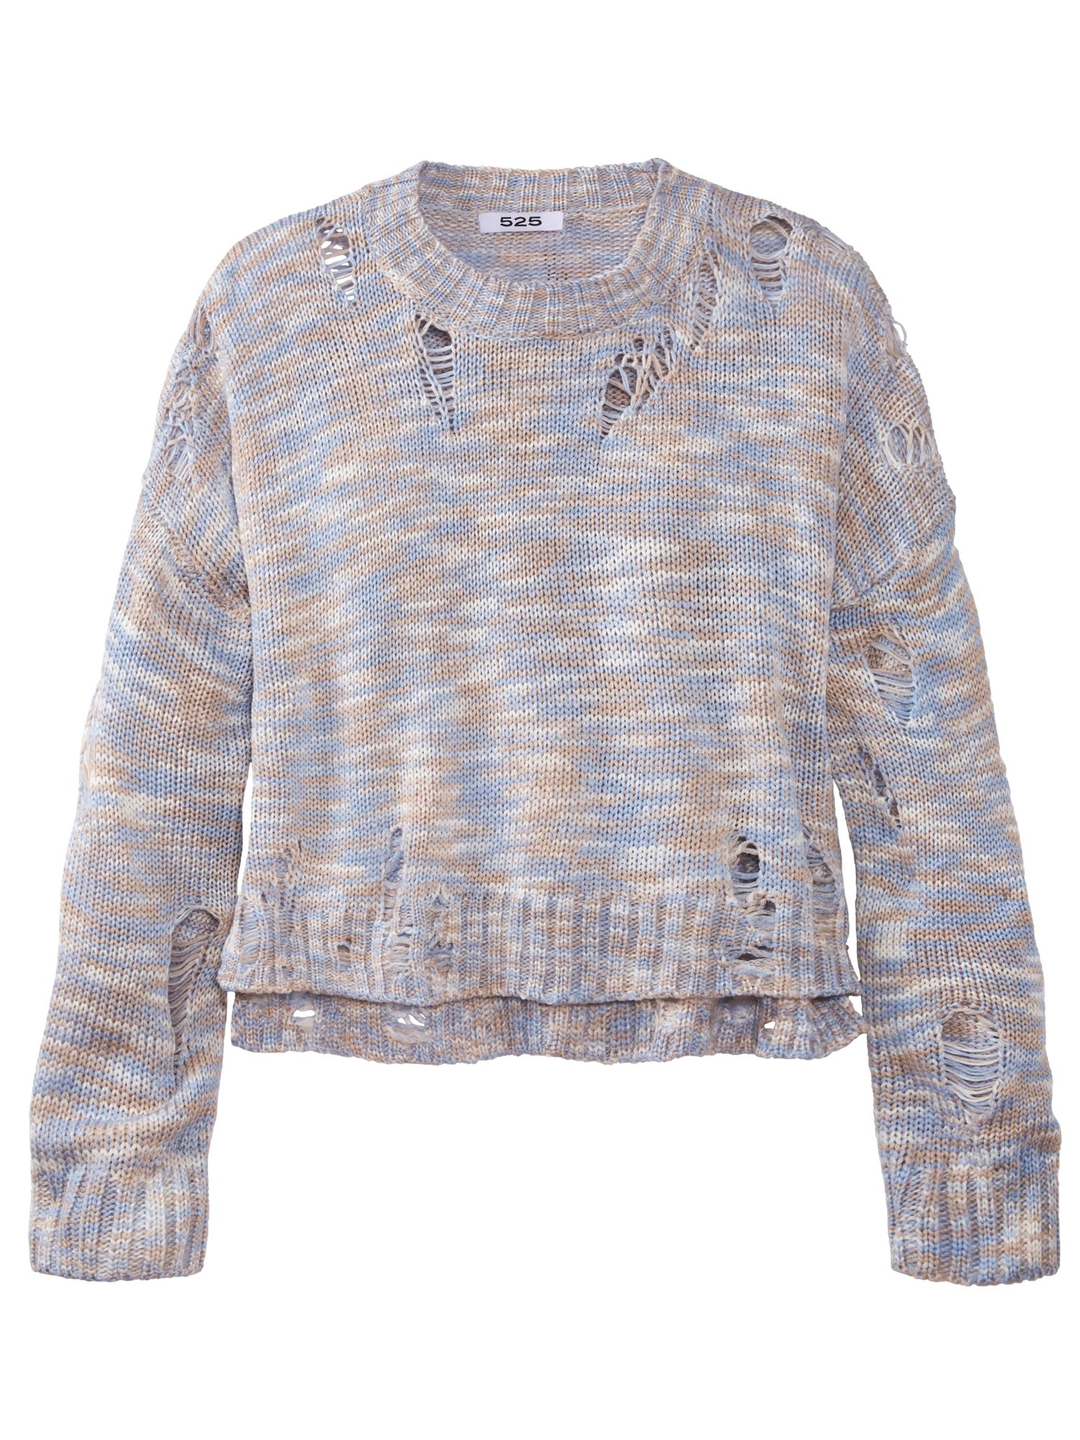 Distressed Pullover - Bleach White Multi - Kingfisher Road - Online Boutique